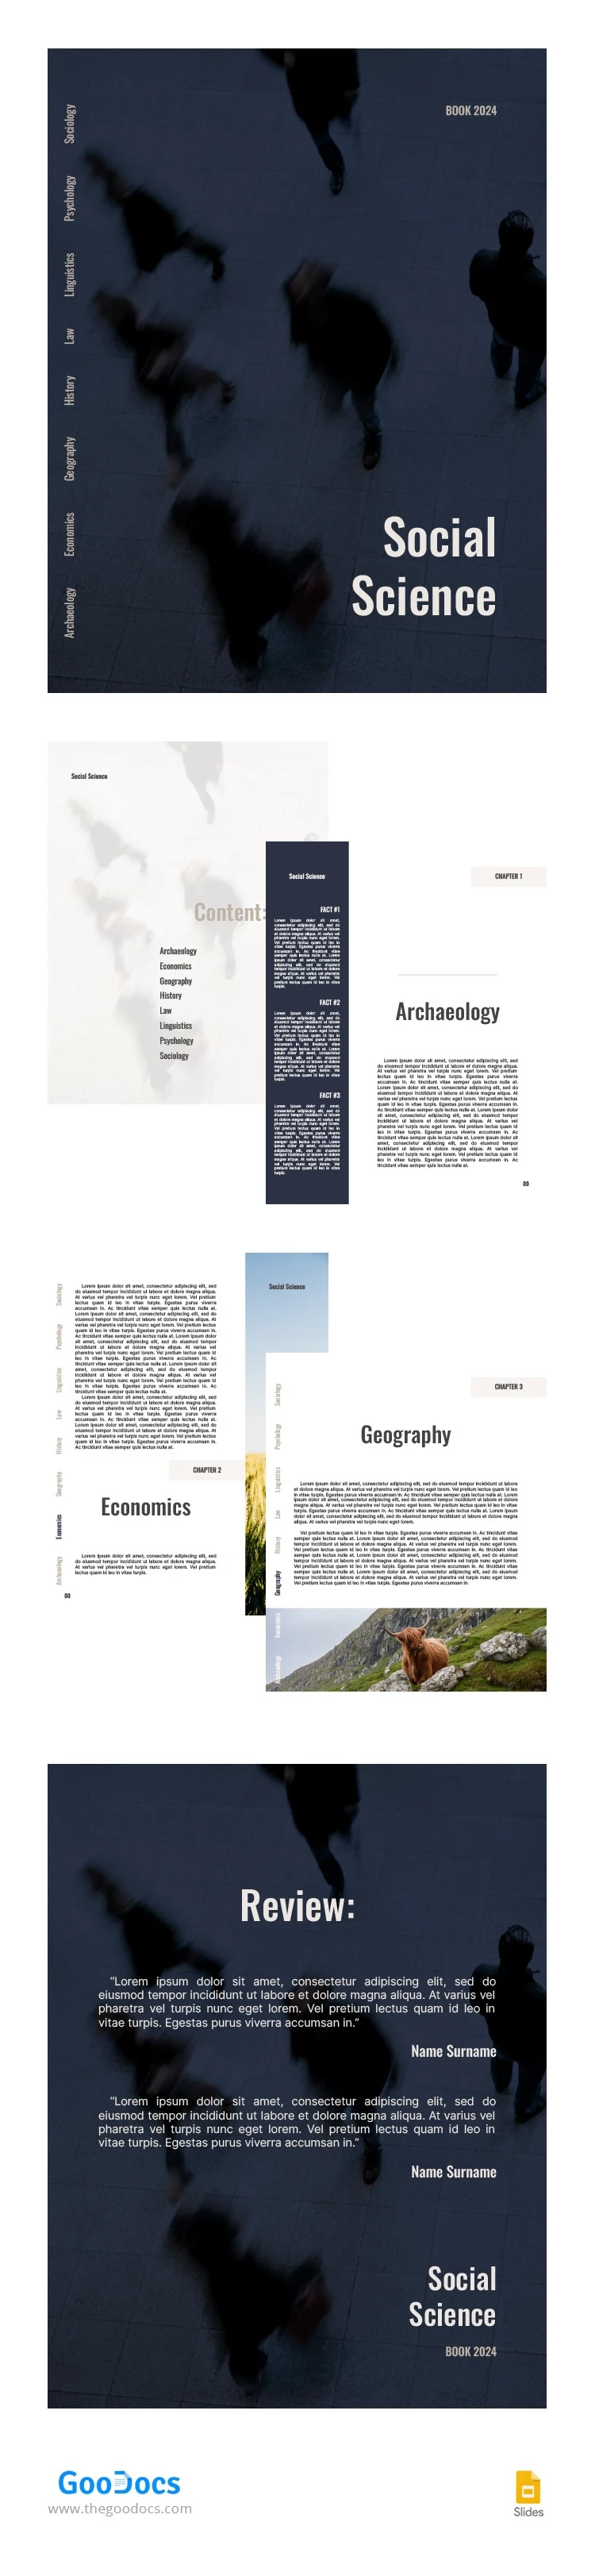 Structural Modern Social Science Book - free Google Docs Template - 10065923